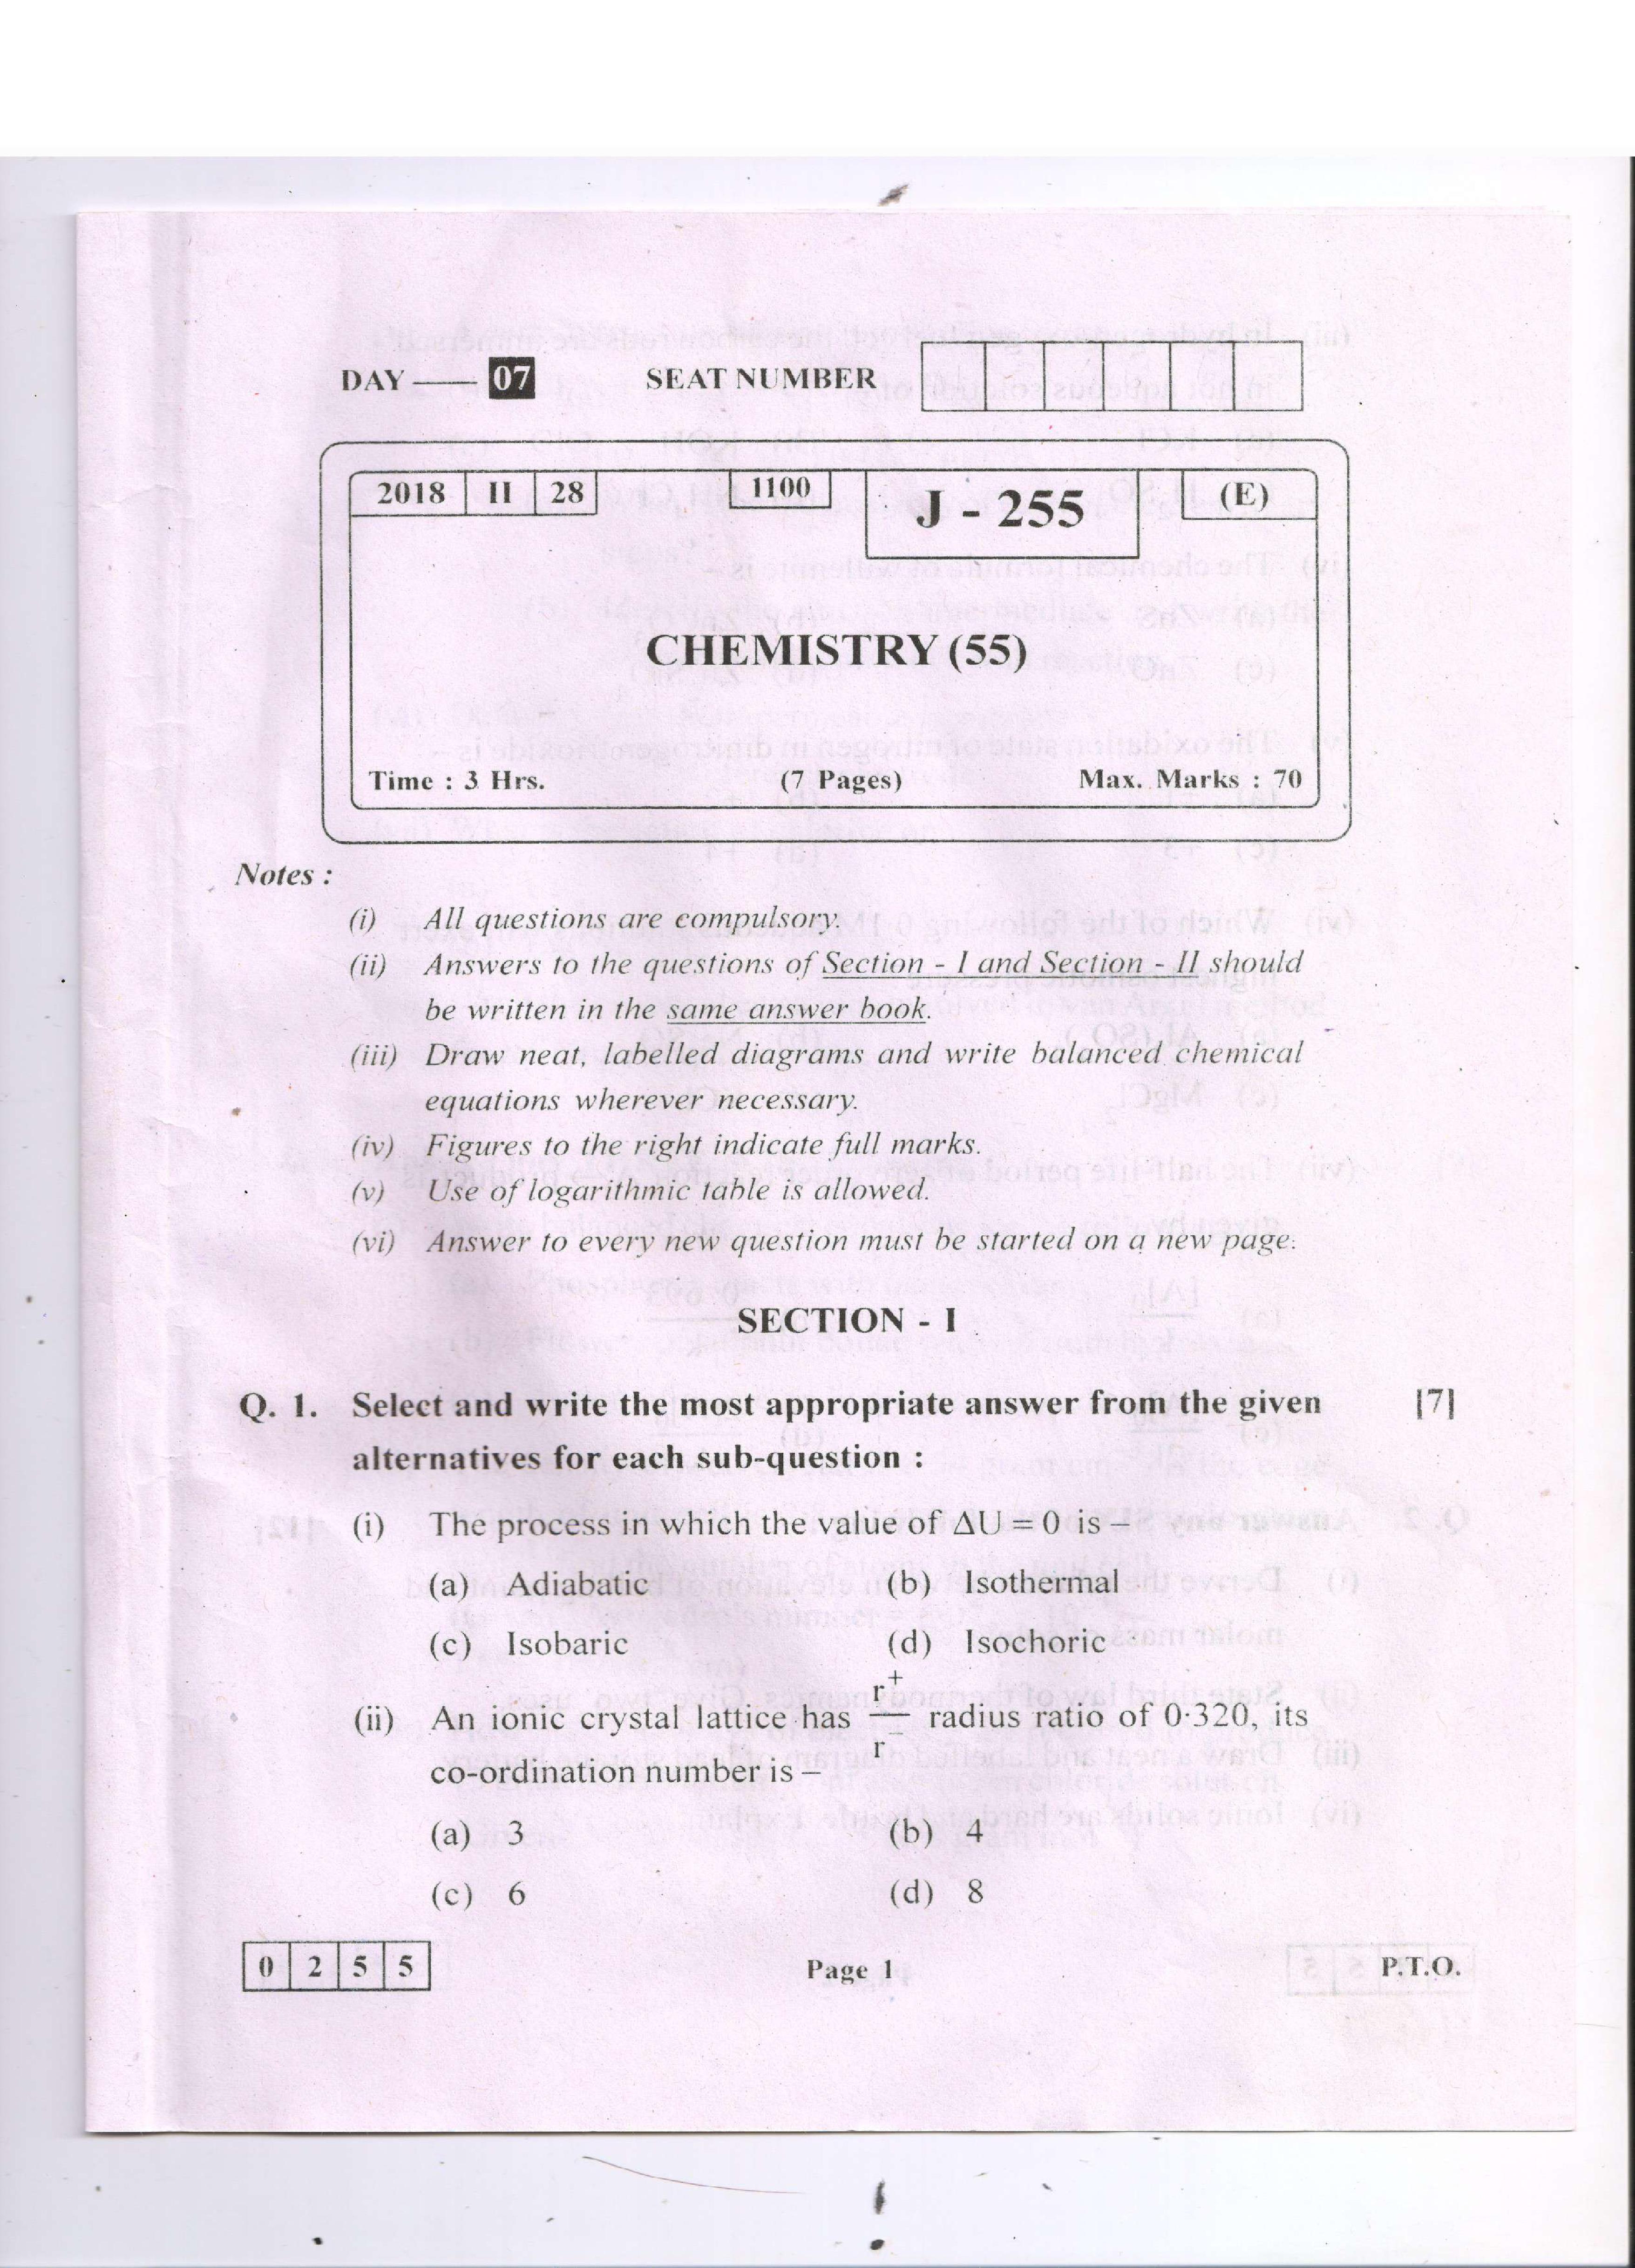 Maharashtra Class 12 Question Paper 2018 Chemistry - Page 1